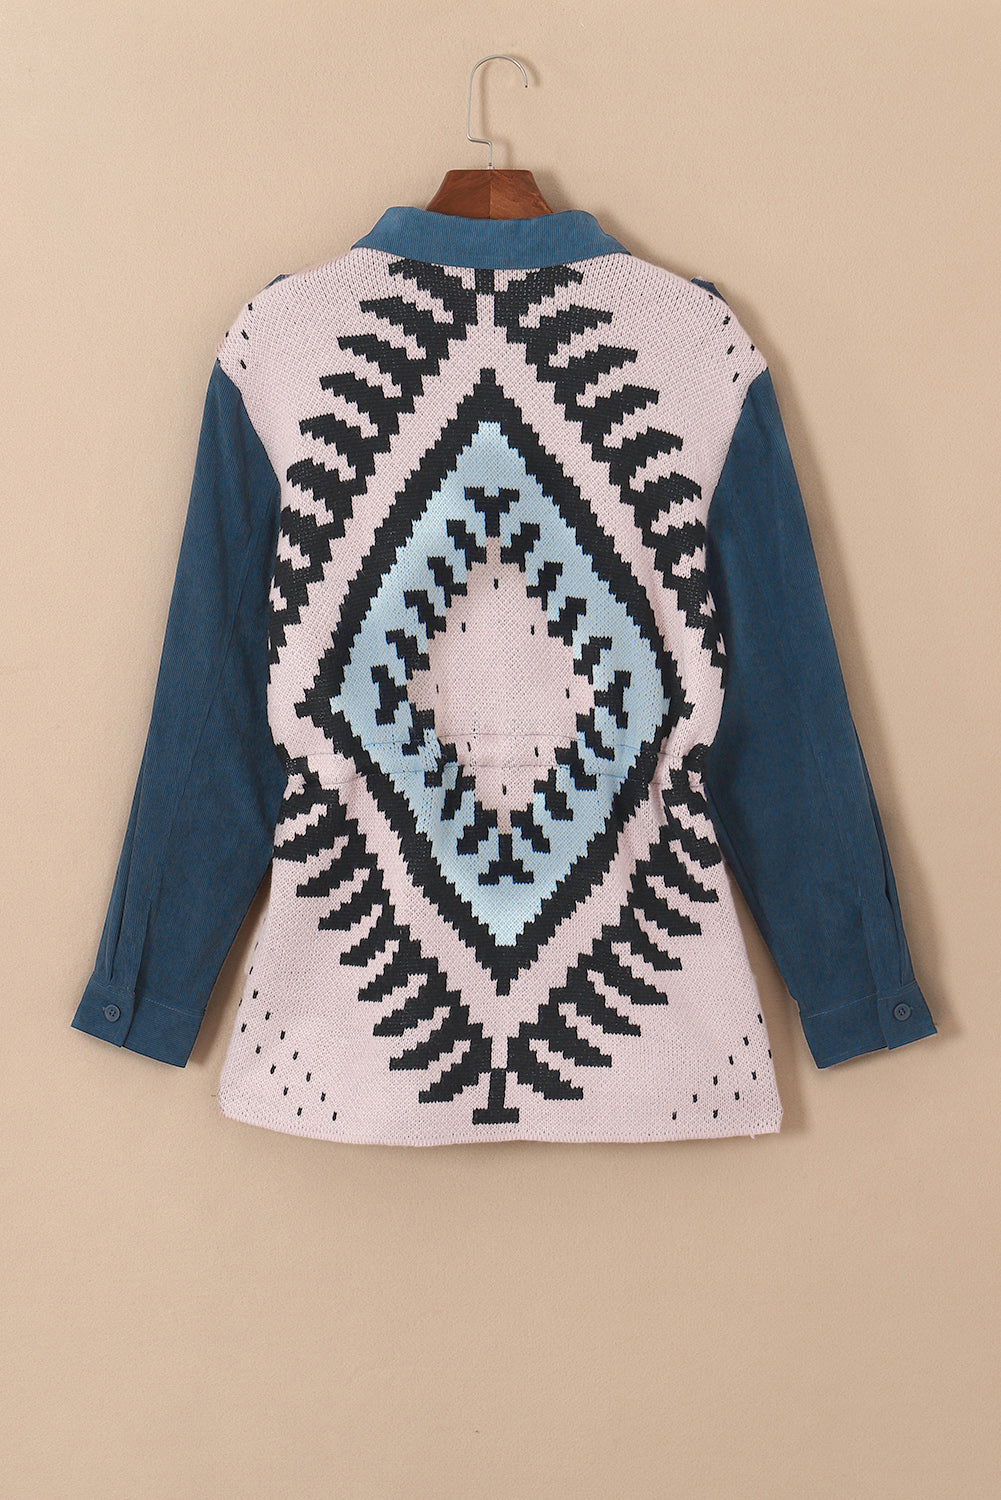 - Blue Corduroy Cinched Aztec Back Shacket - womens shacket at TFC&H Co.